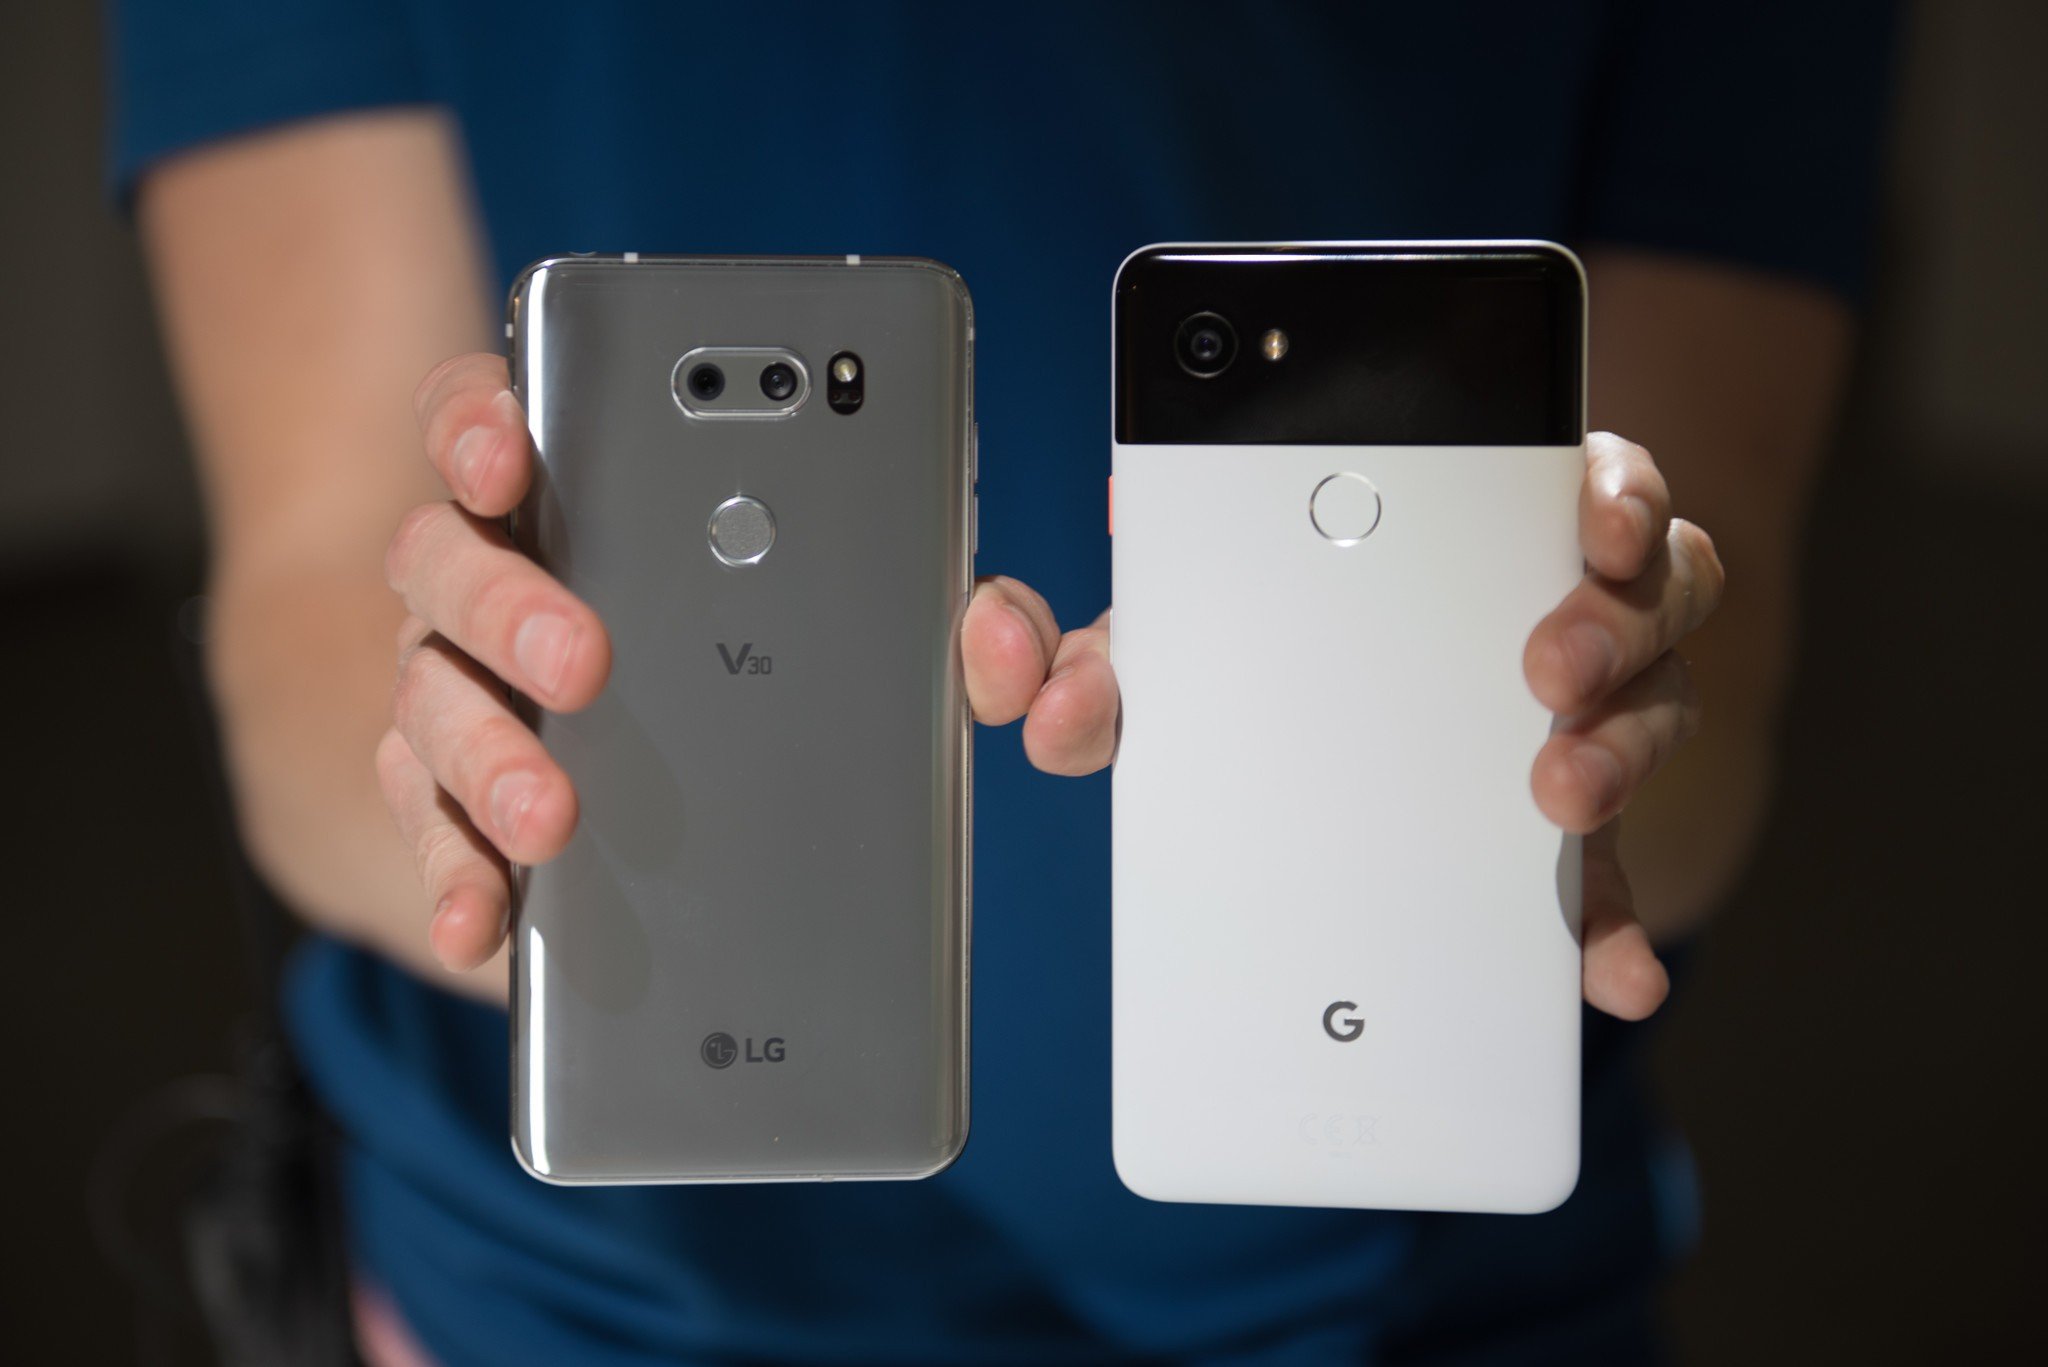 Pixel 2 and LG V30